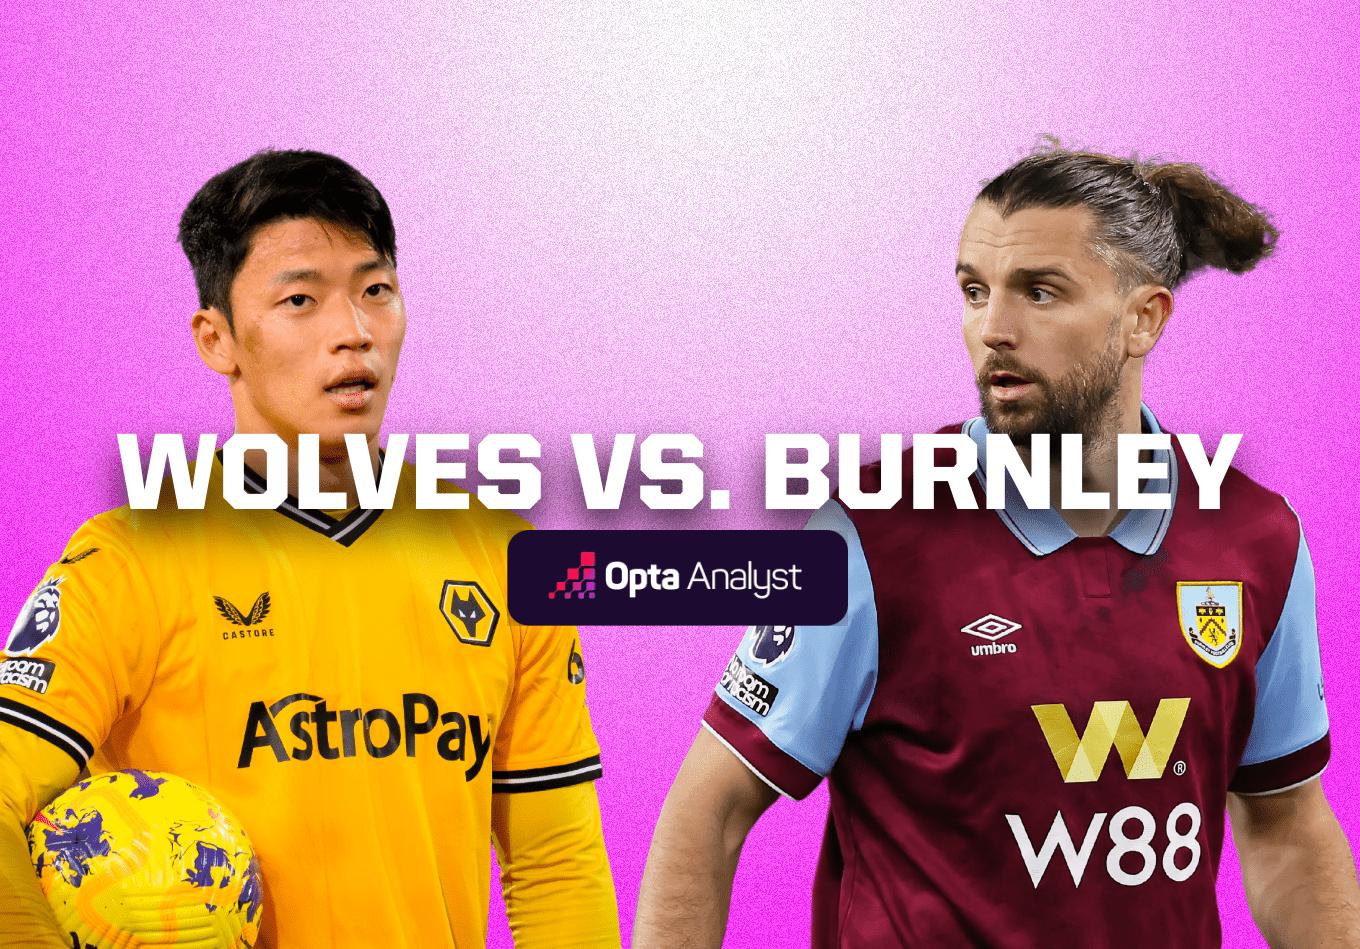 Wolves vs Burnley: Prediction and Preview